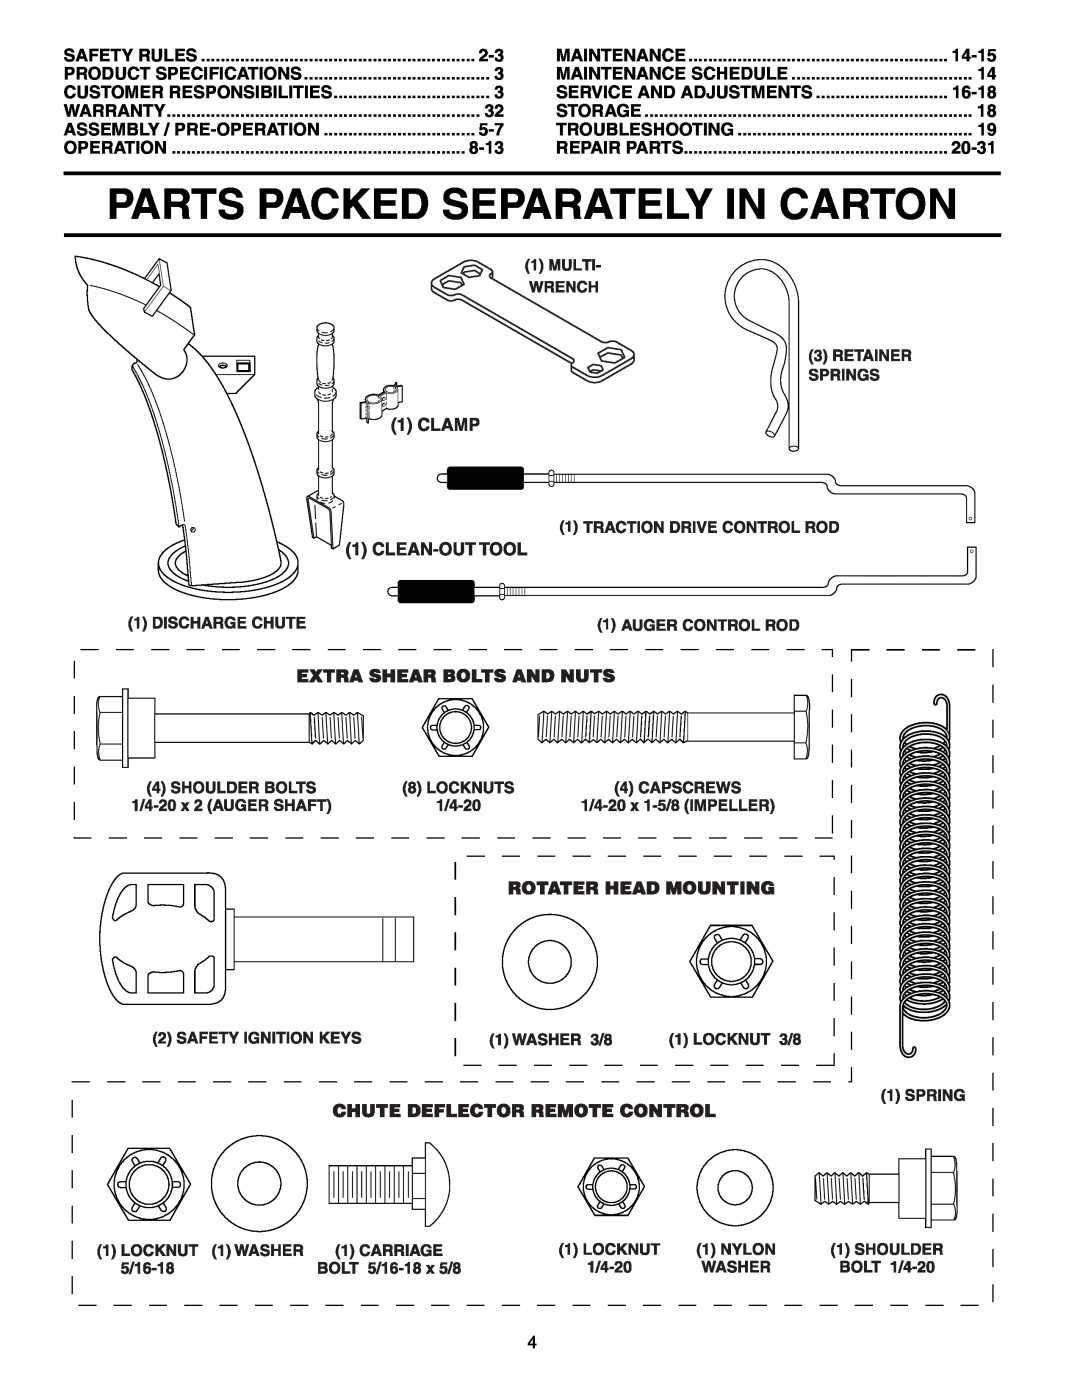 Poulan PR10527ESA Parts Packed Separately In Carton, 8-13, 14-15, Service And Adjustments, 16-18, 20-31, Safety Rules 